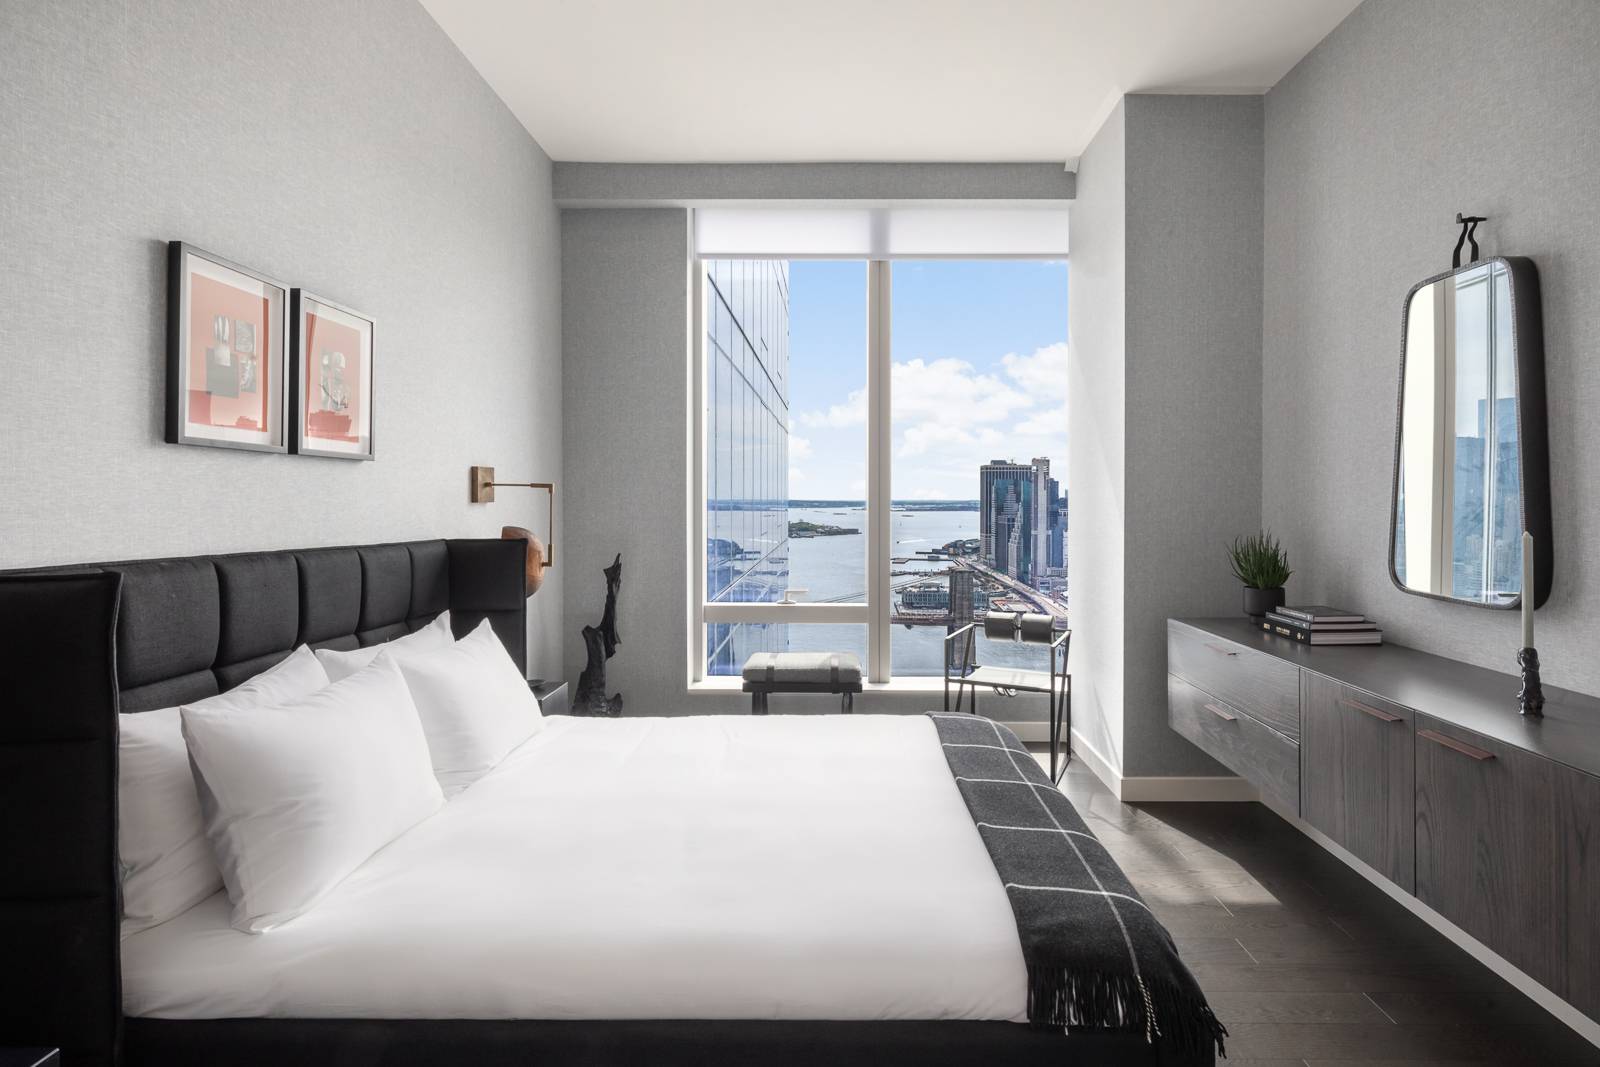 ONE MANHATTAN SQUARE OFFERS ONE OF THE LAST 20 YEAR TAX ABATEMENTS AVAILABLE IN NEW YORK CITY Residence 10N is a 695 square foot one bedroom, one bathroom with an ...